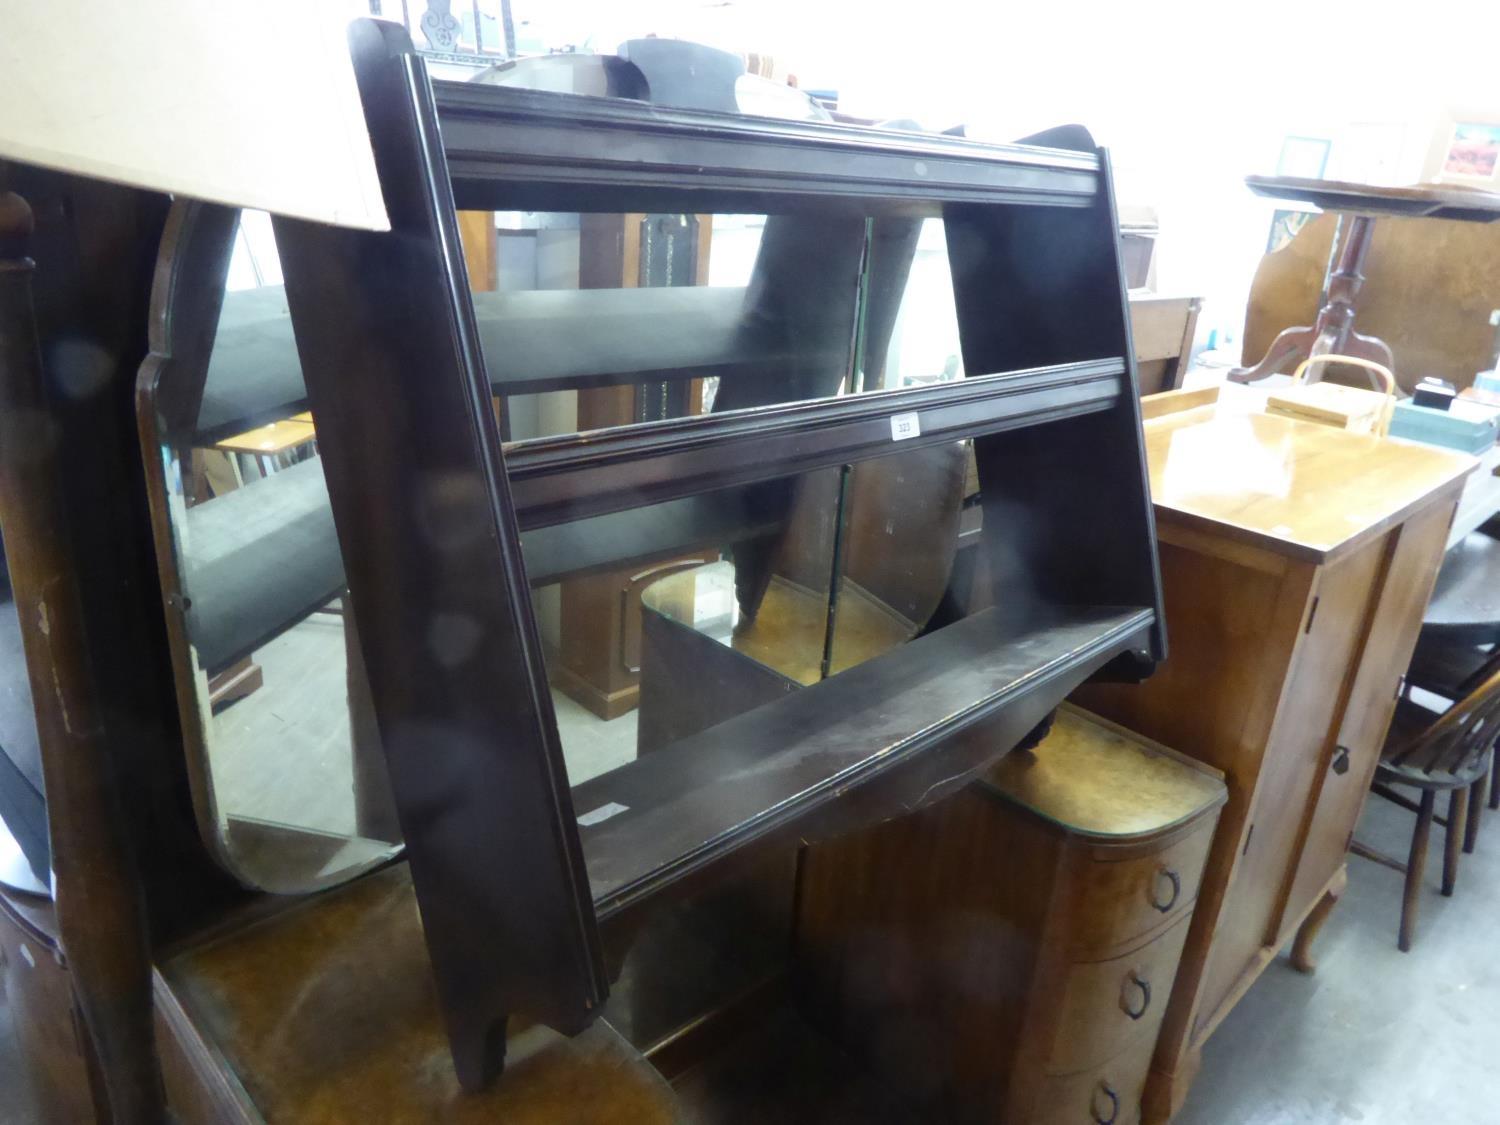 AN EARLY 20TH CENTURY EBONISED MURAL TWO TIER OPEN SHELVES WITH HINGED DUST FLAPS, 2?10? WIDE